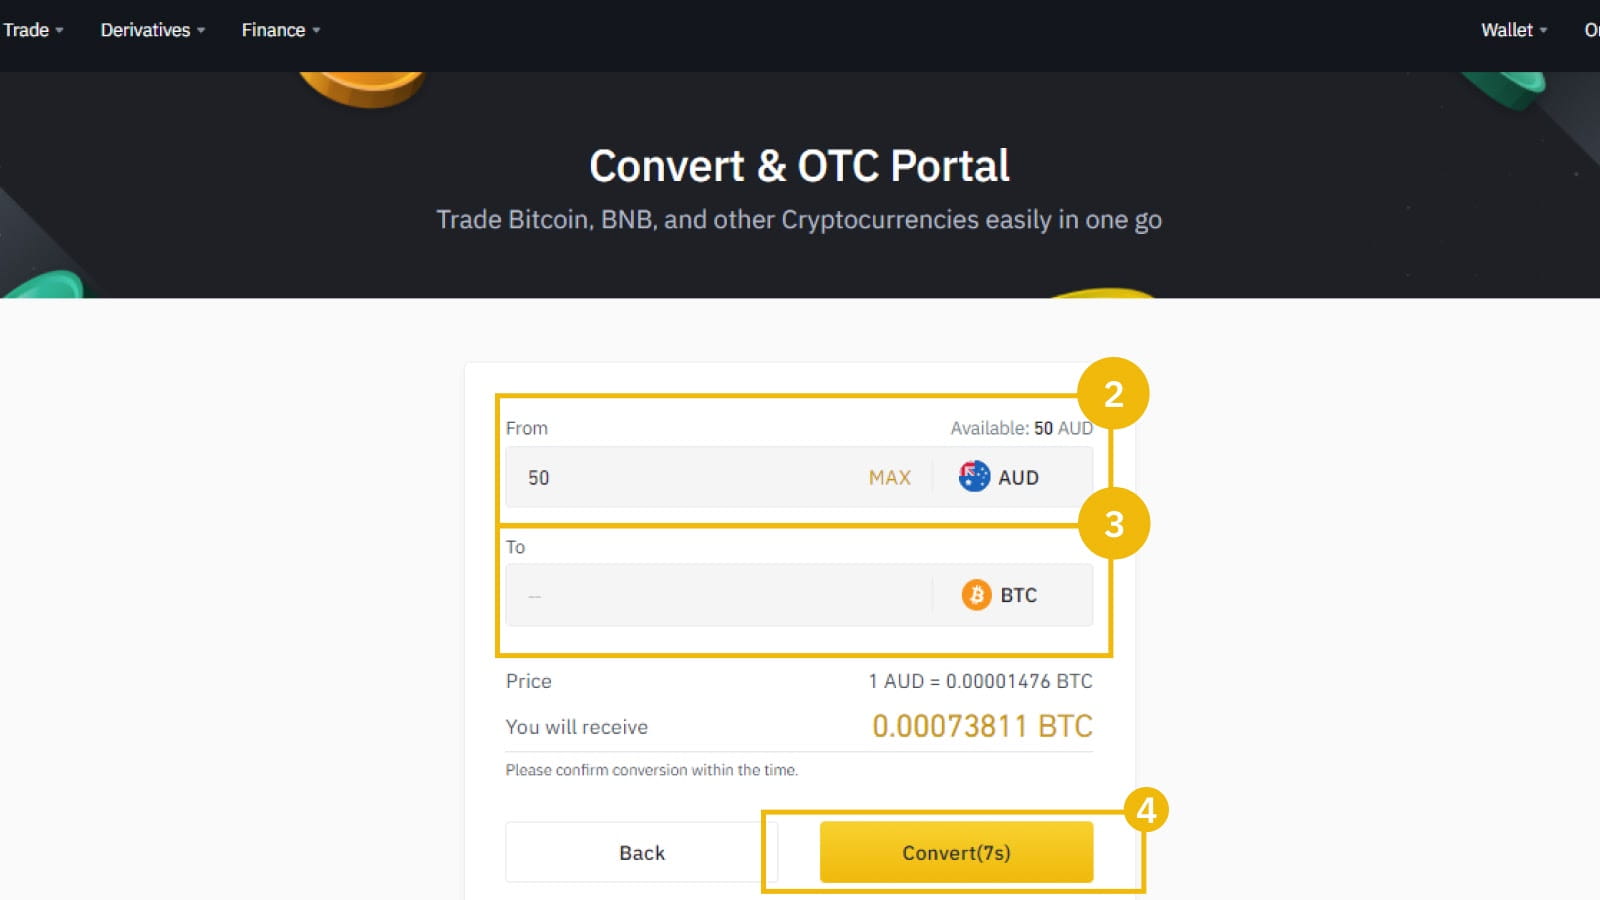 Convert 1 BTC to AUD - Bitcoin price in AUD | CoinCodex